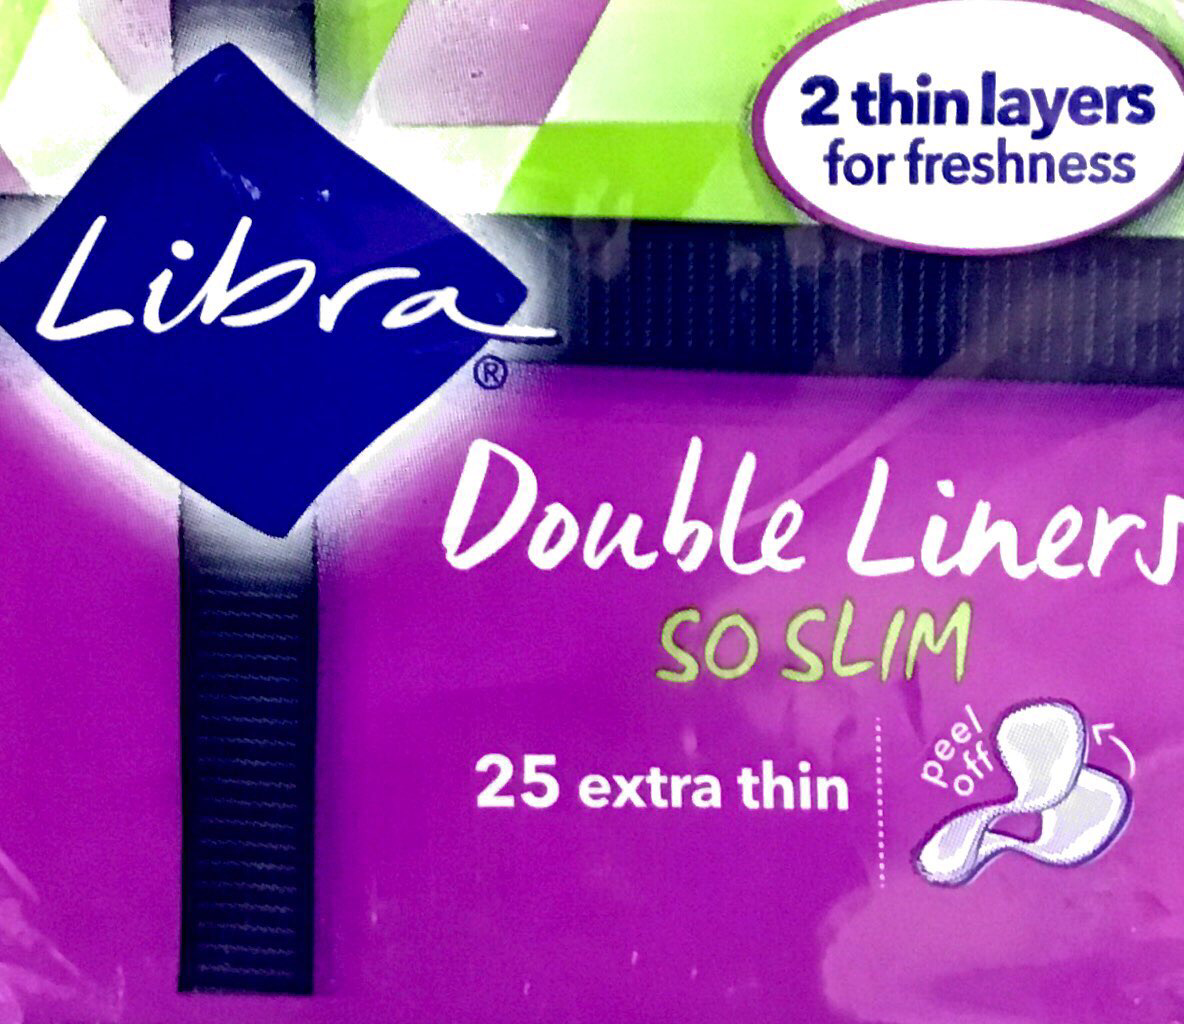 Libra Double Liners so slim - extra thin 25